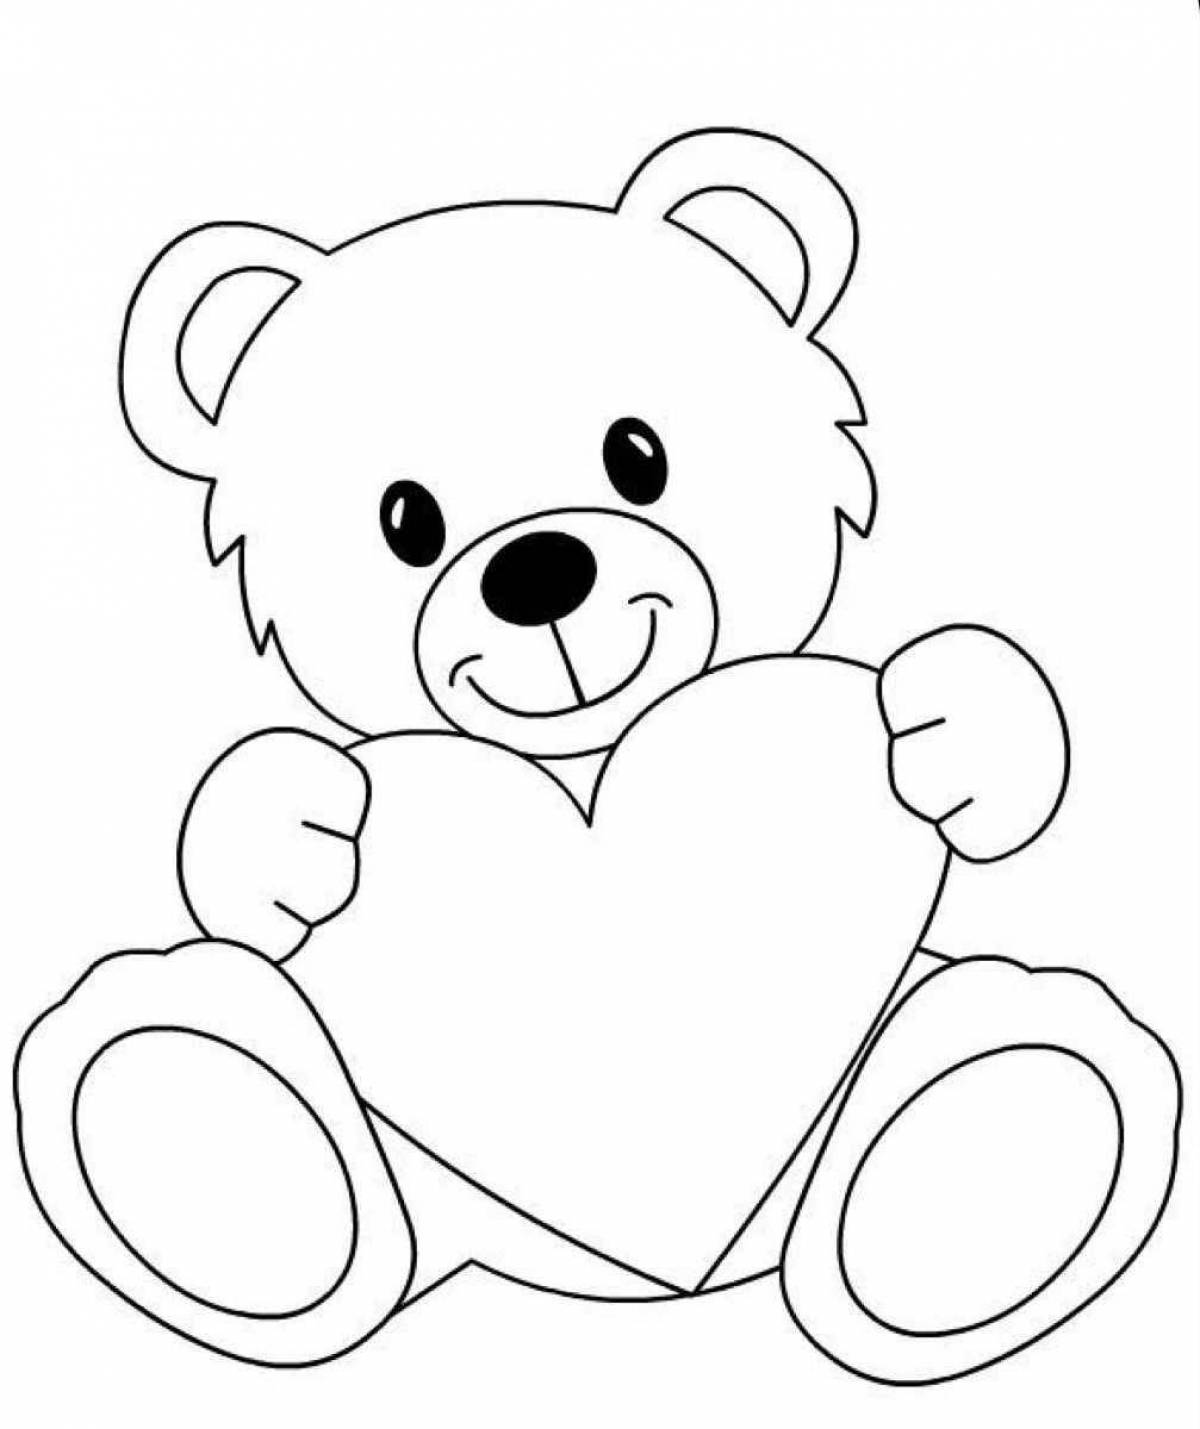 Coloring book cute teddy bear for children 5-6 years old